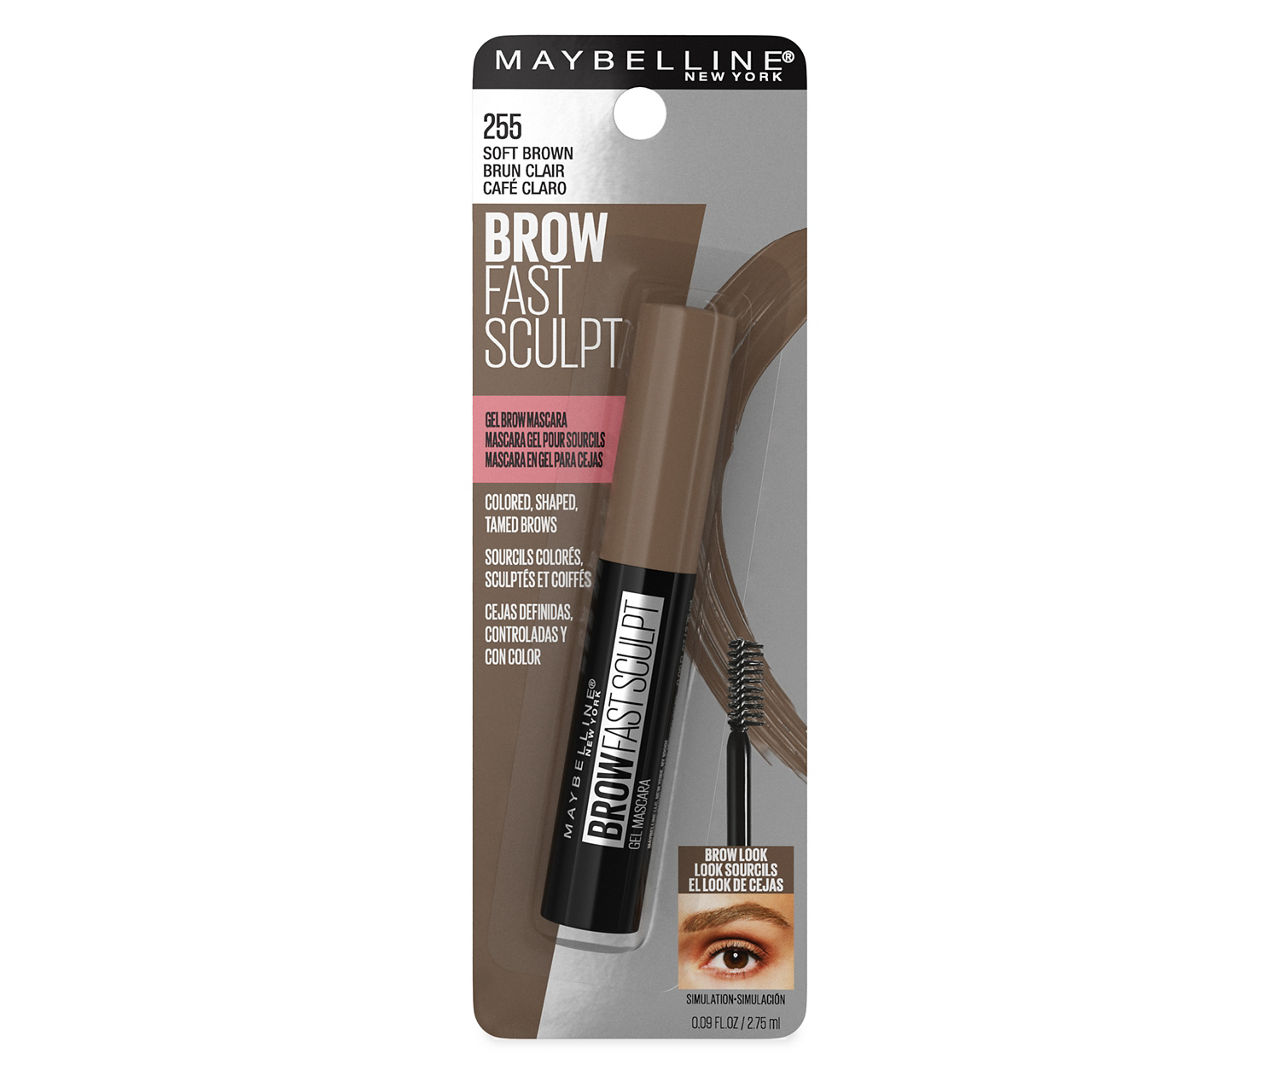 Maybelline Brow Fast Sculpt, Shapes Eyebrows, Eyebrow Mascara Makeup, Soft Brown, 0.09 fl. oz.